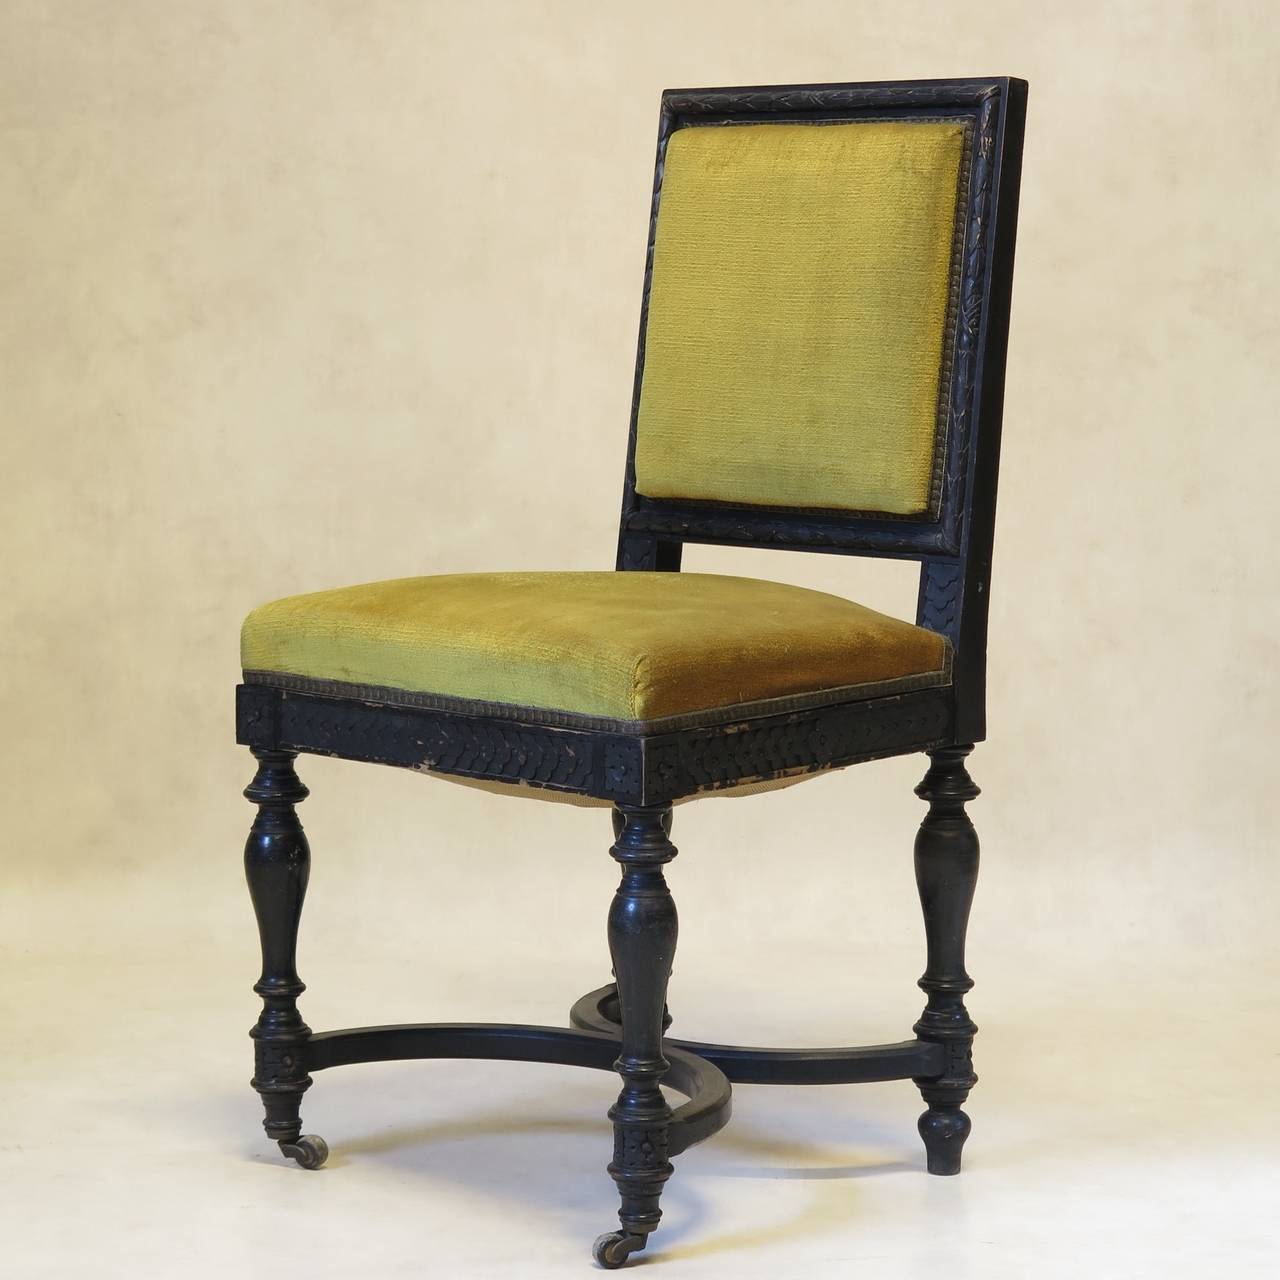 Elegant set of five Napoleon III period side chairs, with carved backs representing a laurel leaf wreath frieze, raised on turned legs joined by a curved X-shape stretcher. The front feet on casters. The apron decorated with rosettes. Upholstered in